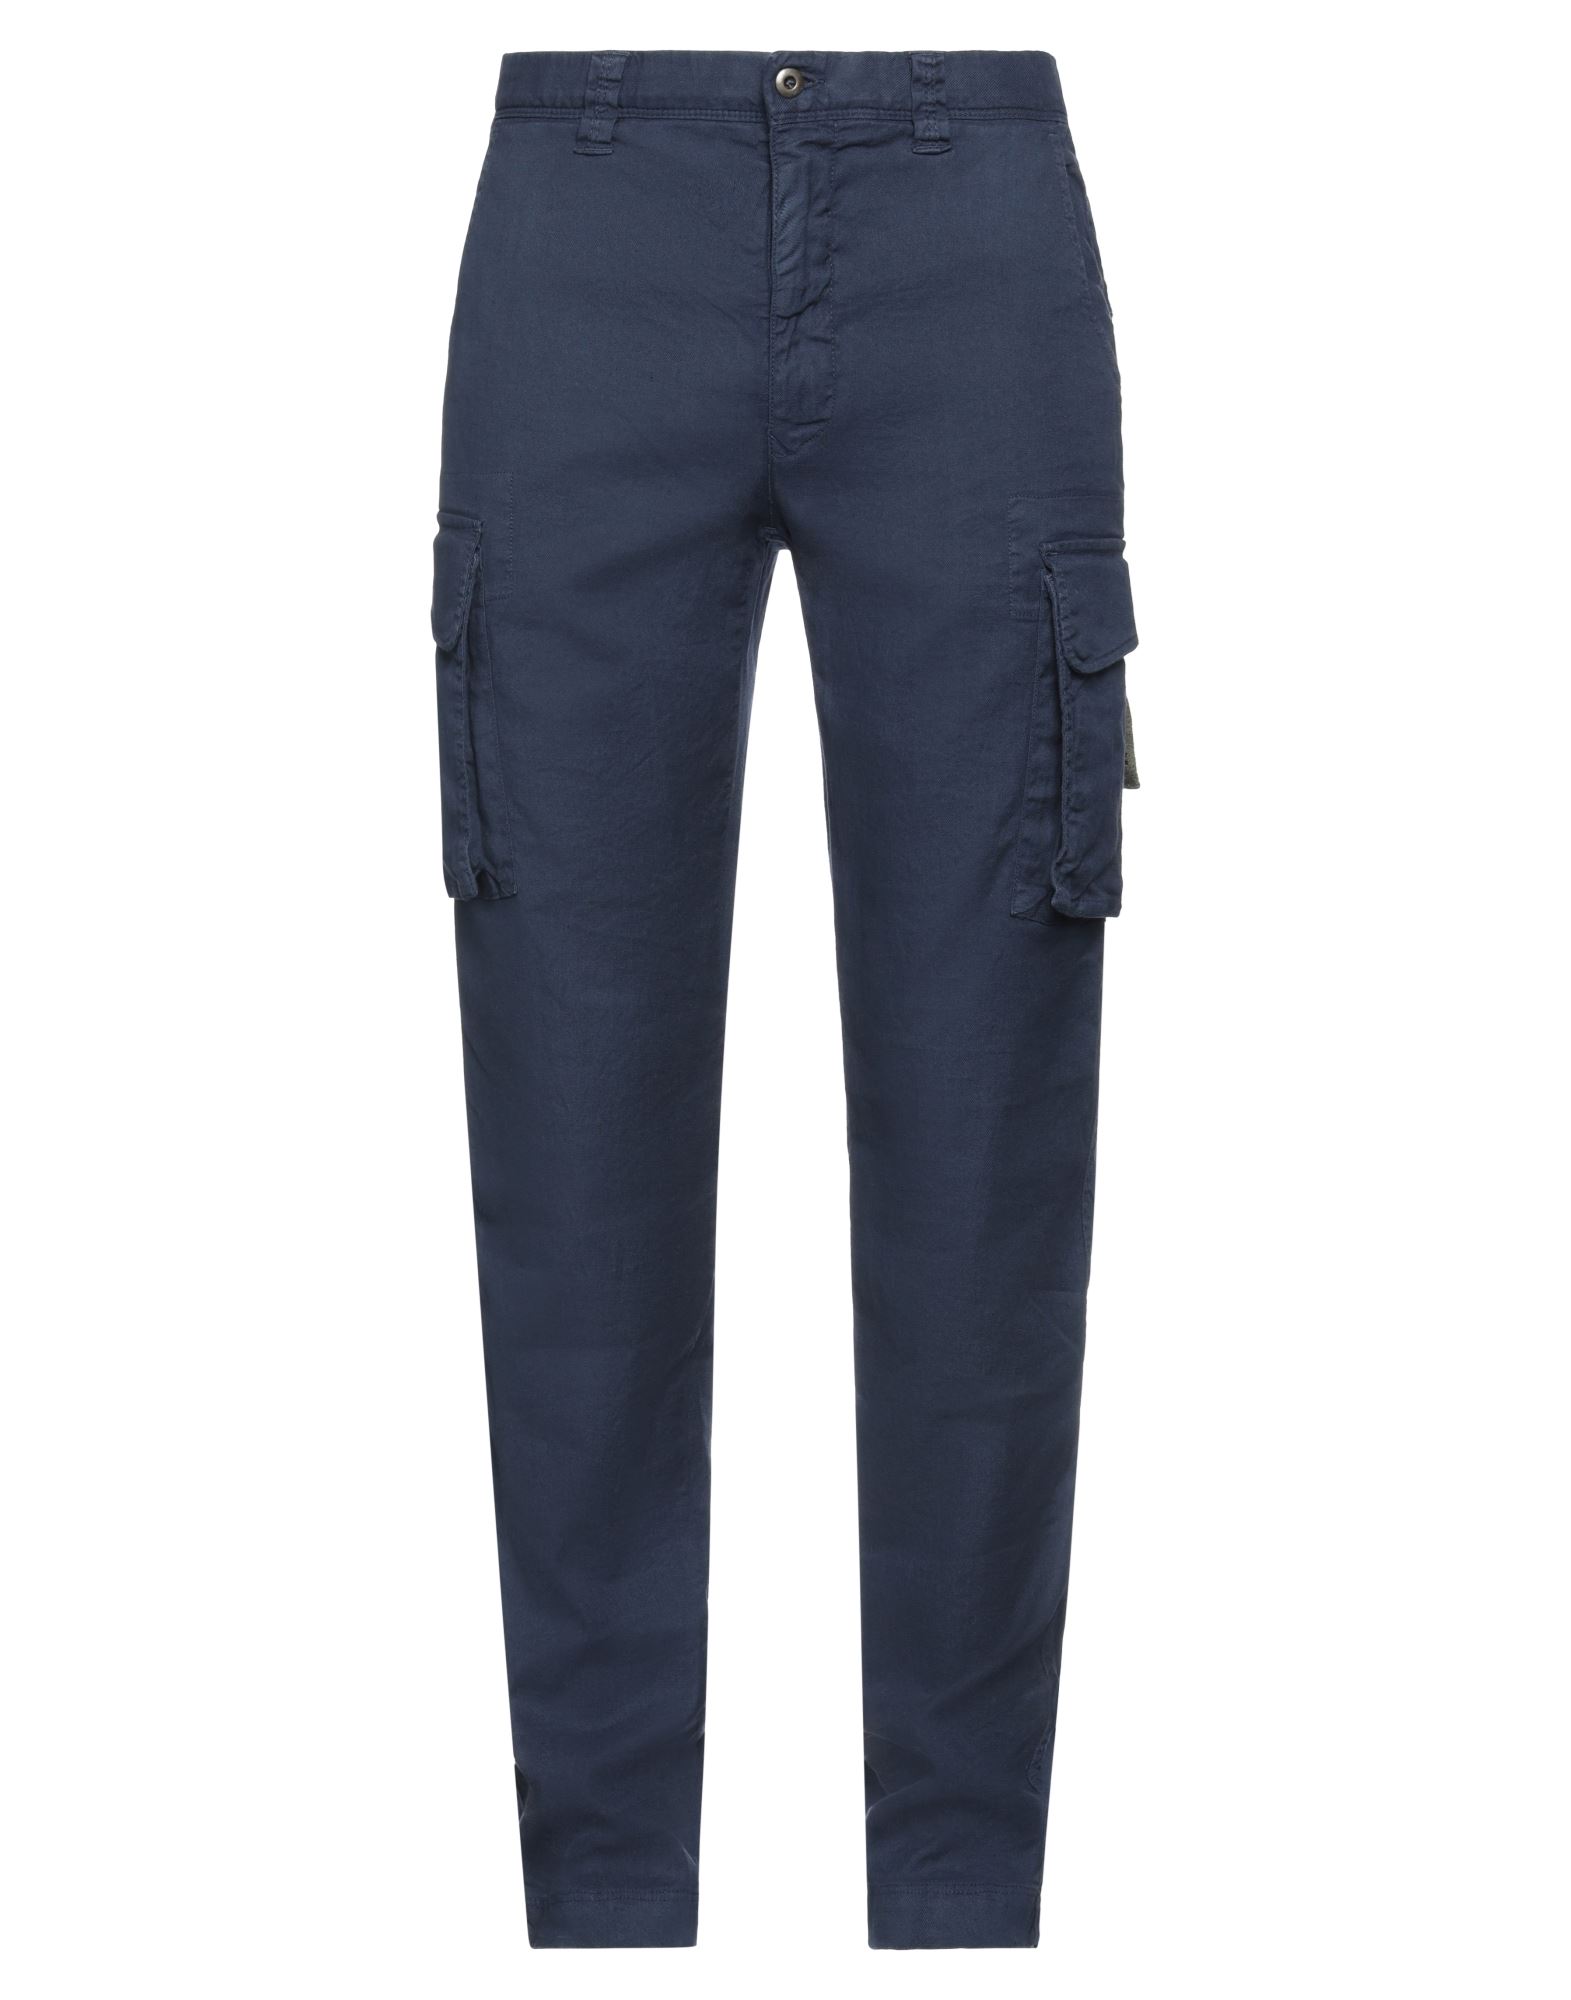 Incotex Pants In Navy Blue